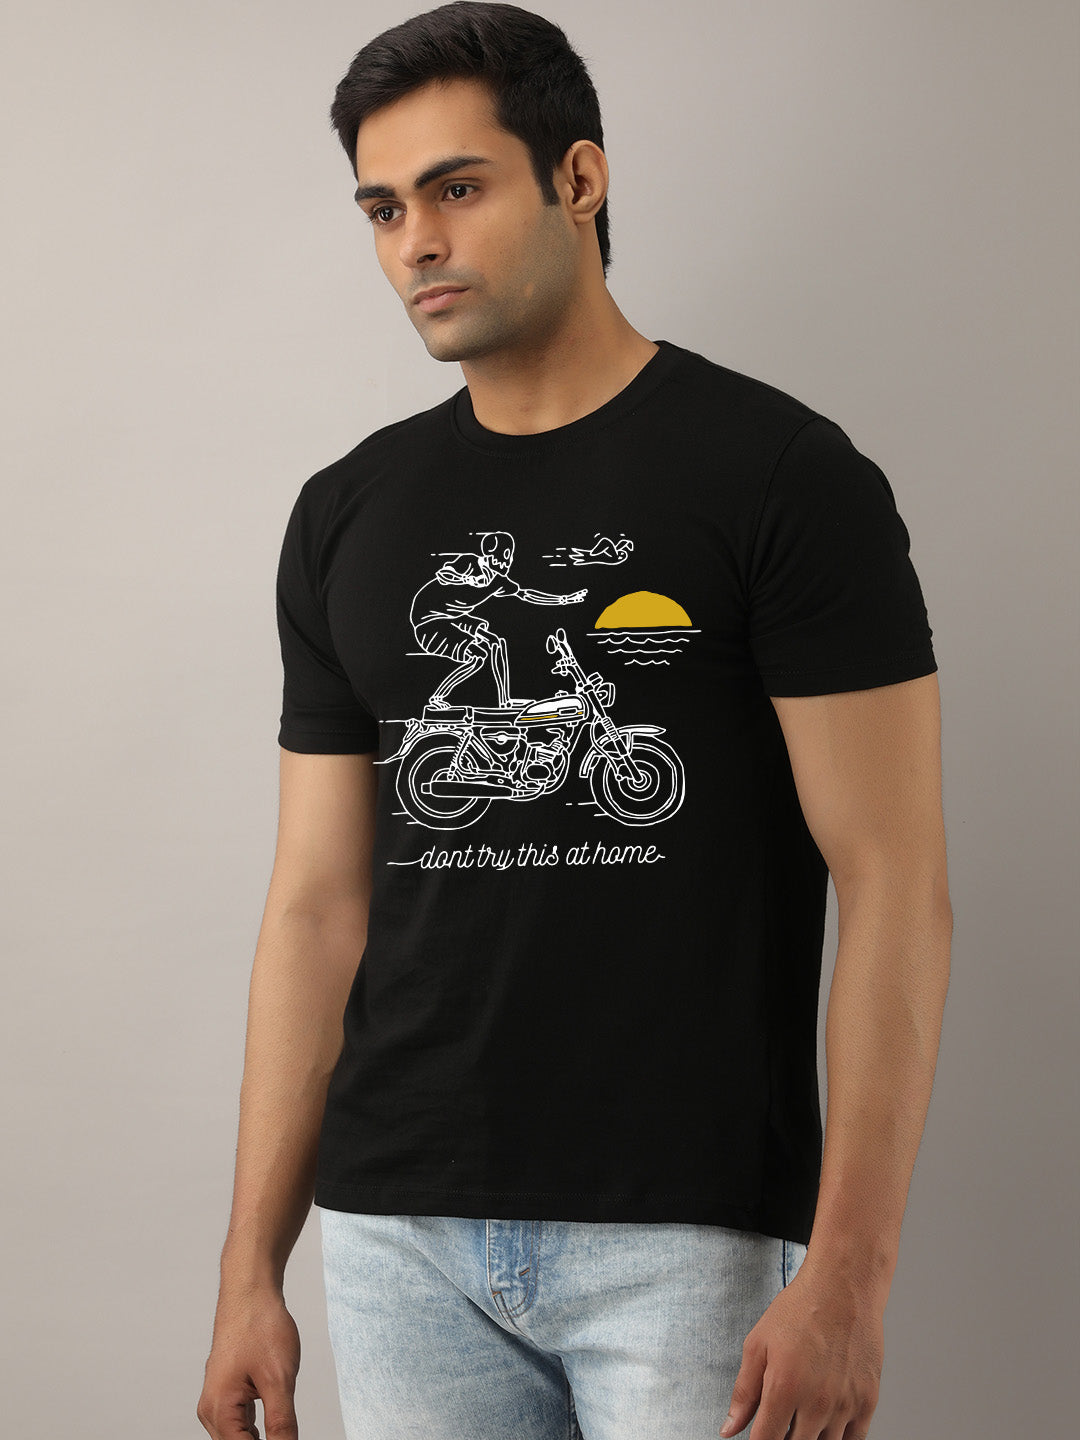 DON'T TRY THIS AT HOME BLACK HALF SLEEVE T-SHIRT